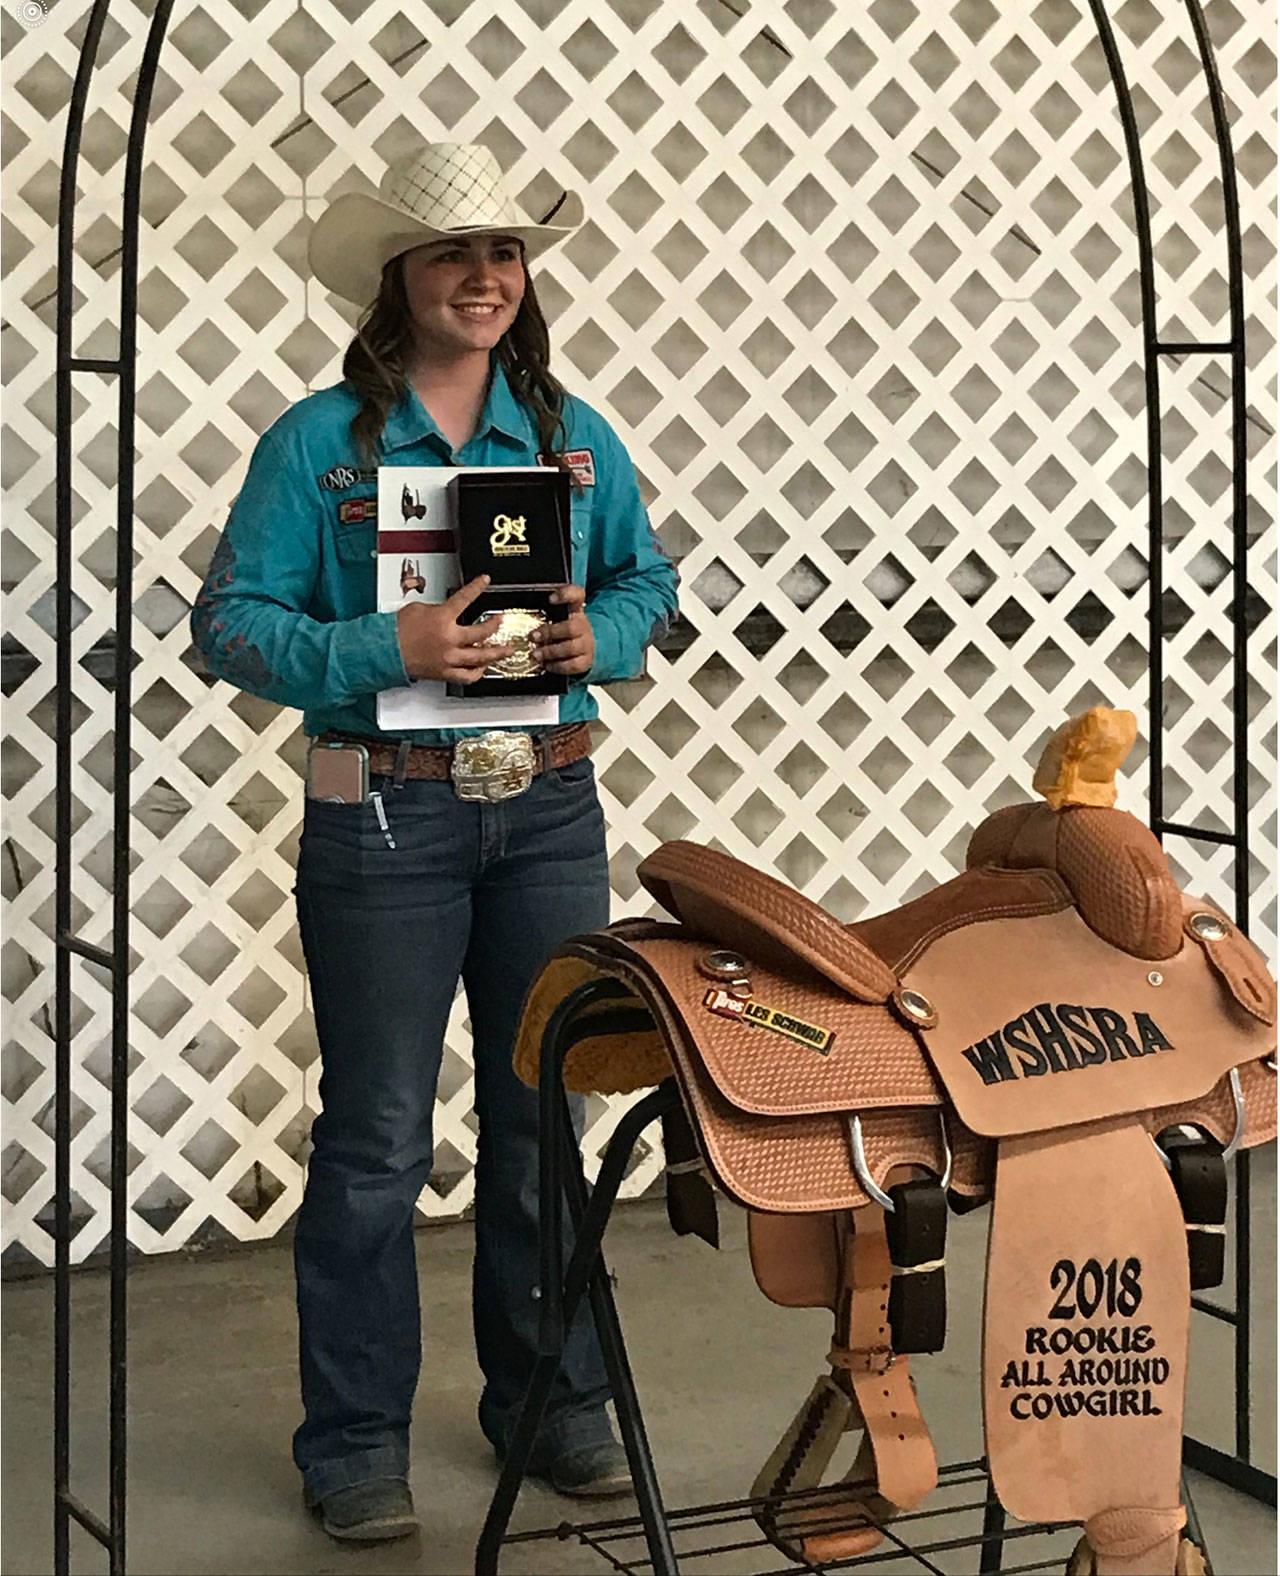 Hard work and dedication to her sport earned Amelia Herman the title of All Around Cowgirl, a saddle and a couple of belts at the Washington State High School Rodeo Finals Junior High Division in May, making her eligible to compete later this month at the National High School Rodeo. (Kay Herman)